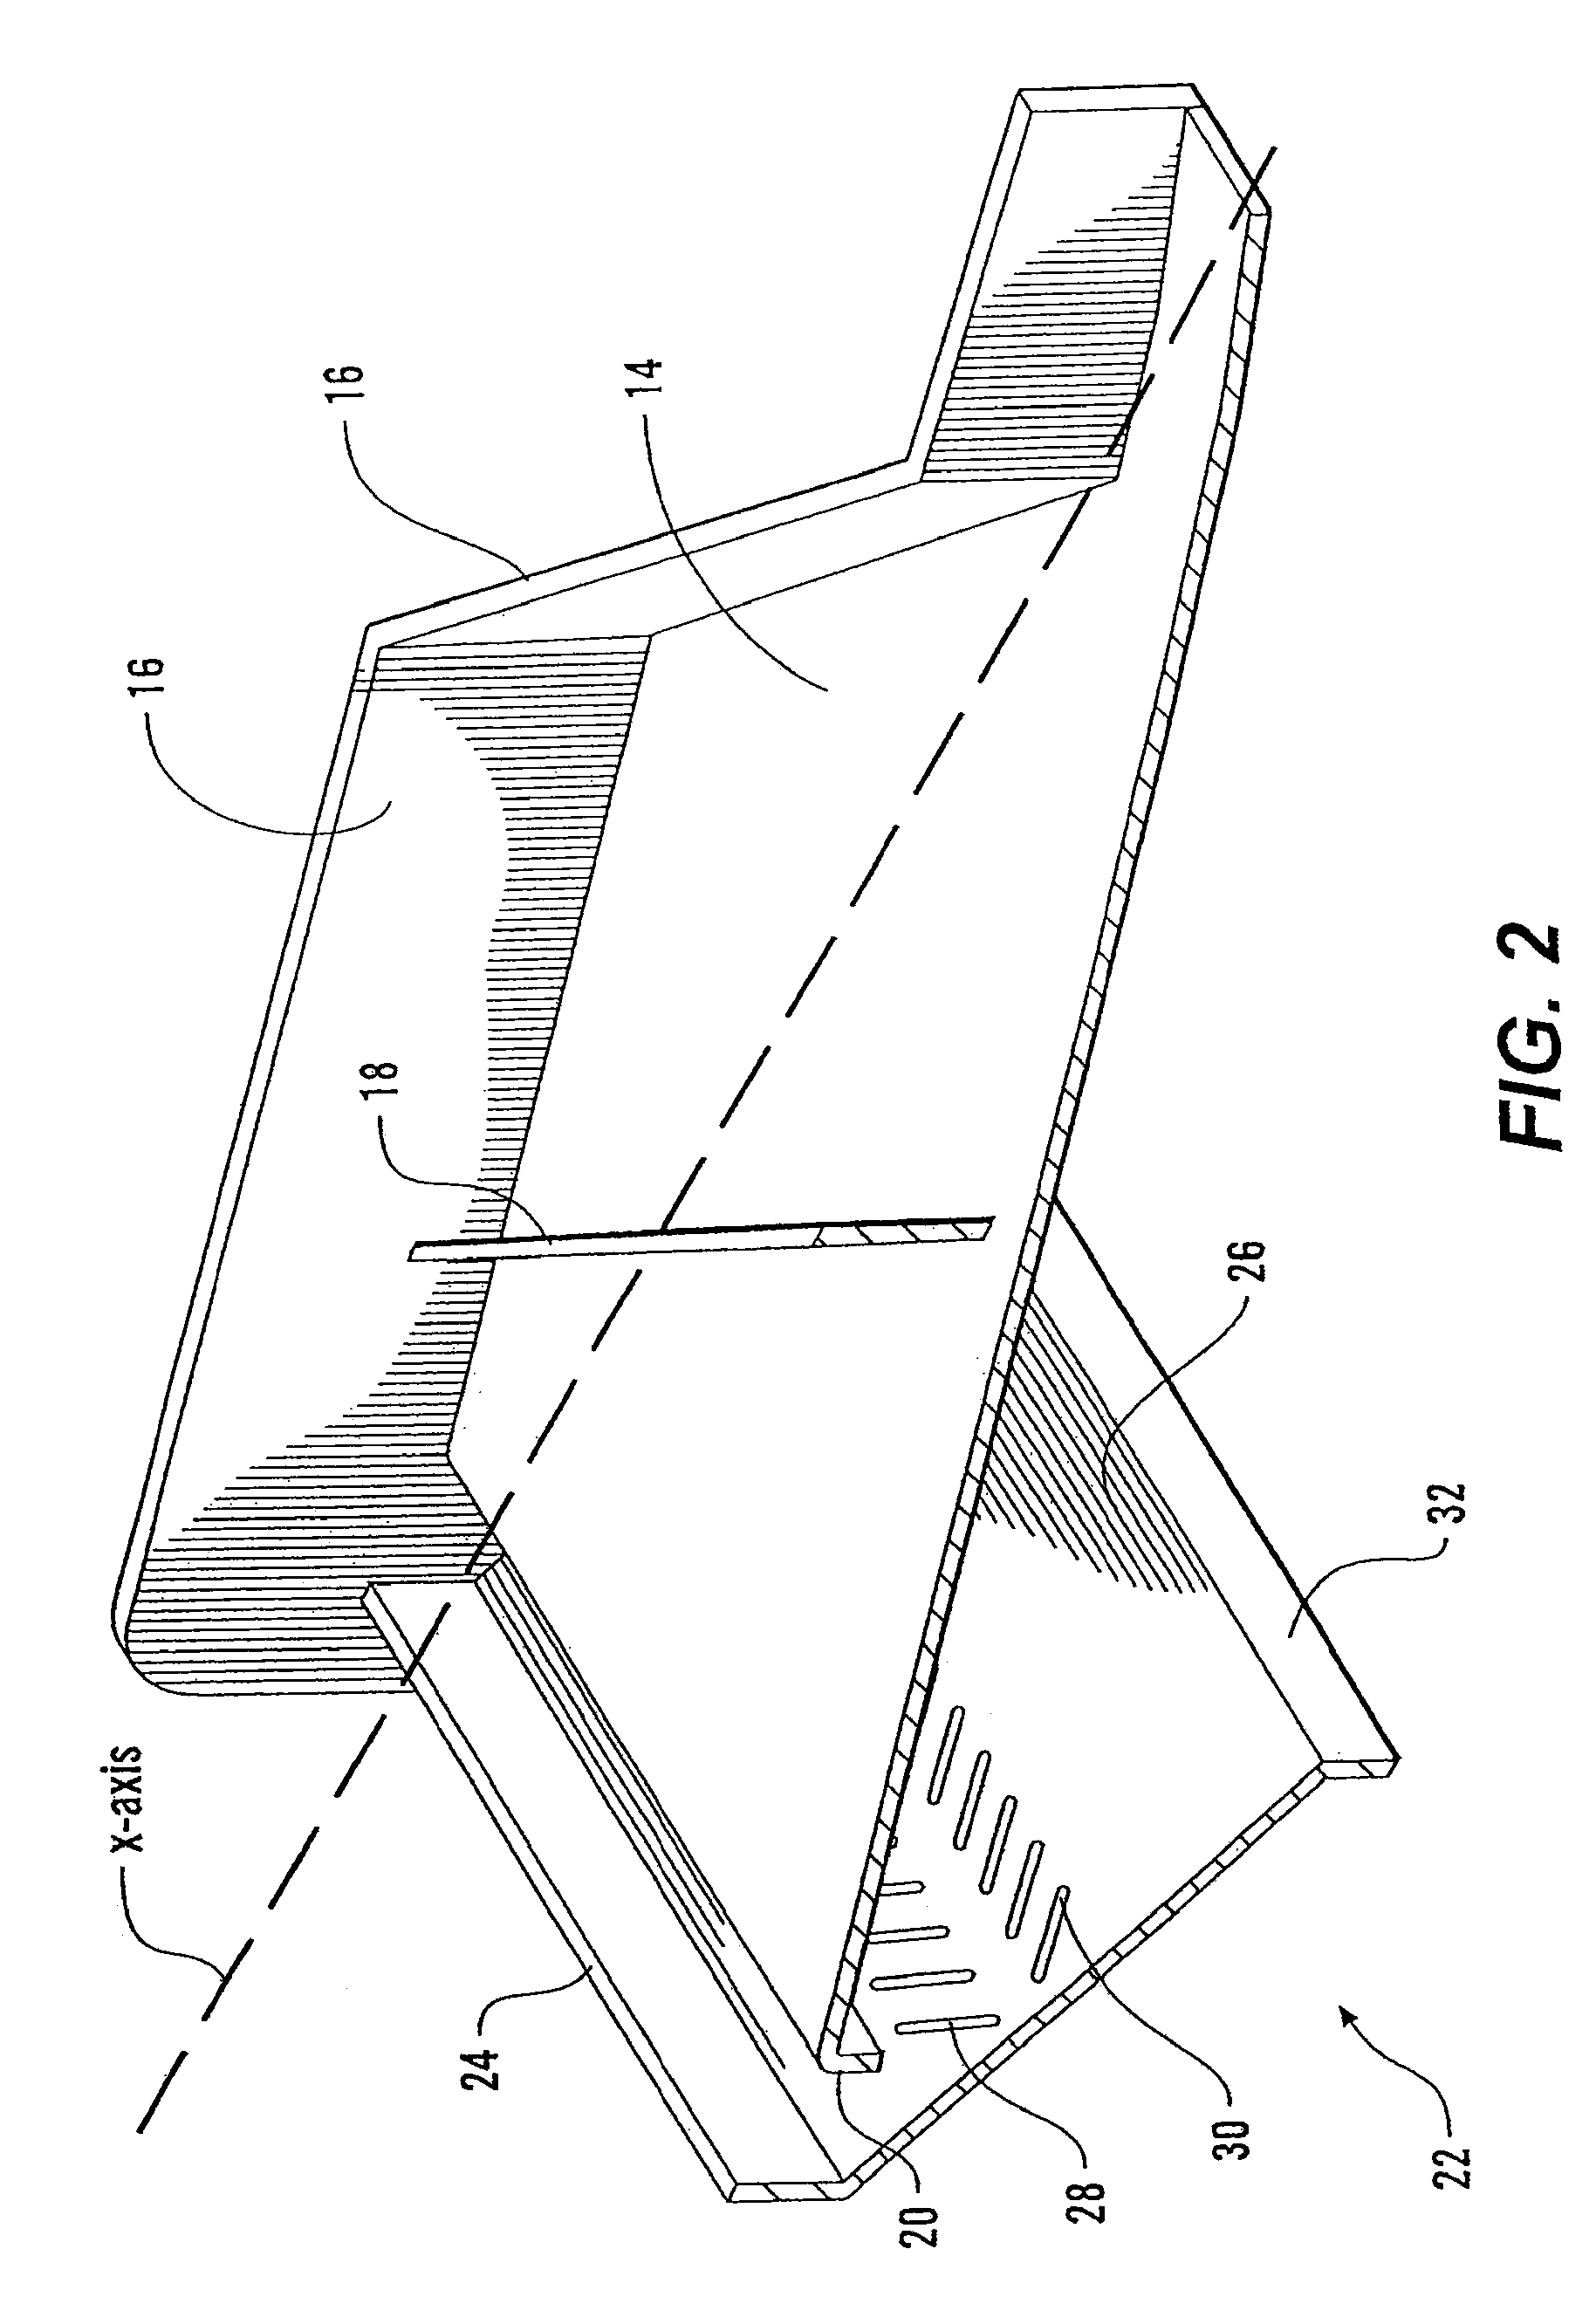 Food coating and topping applicator apparatus and methods of use thereof